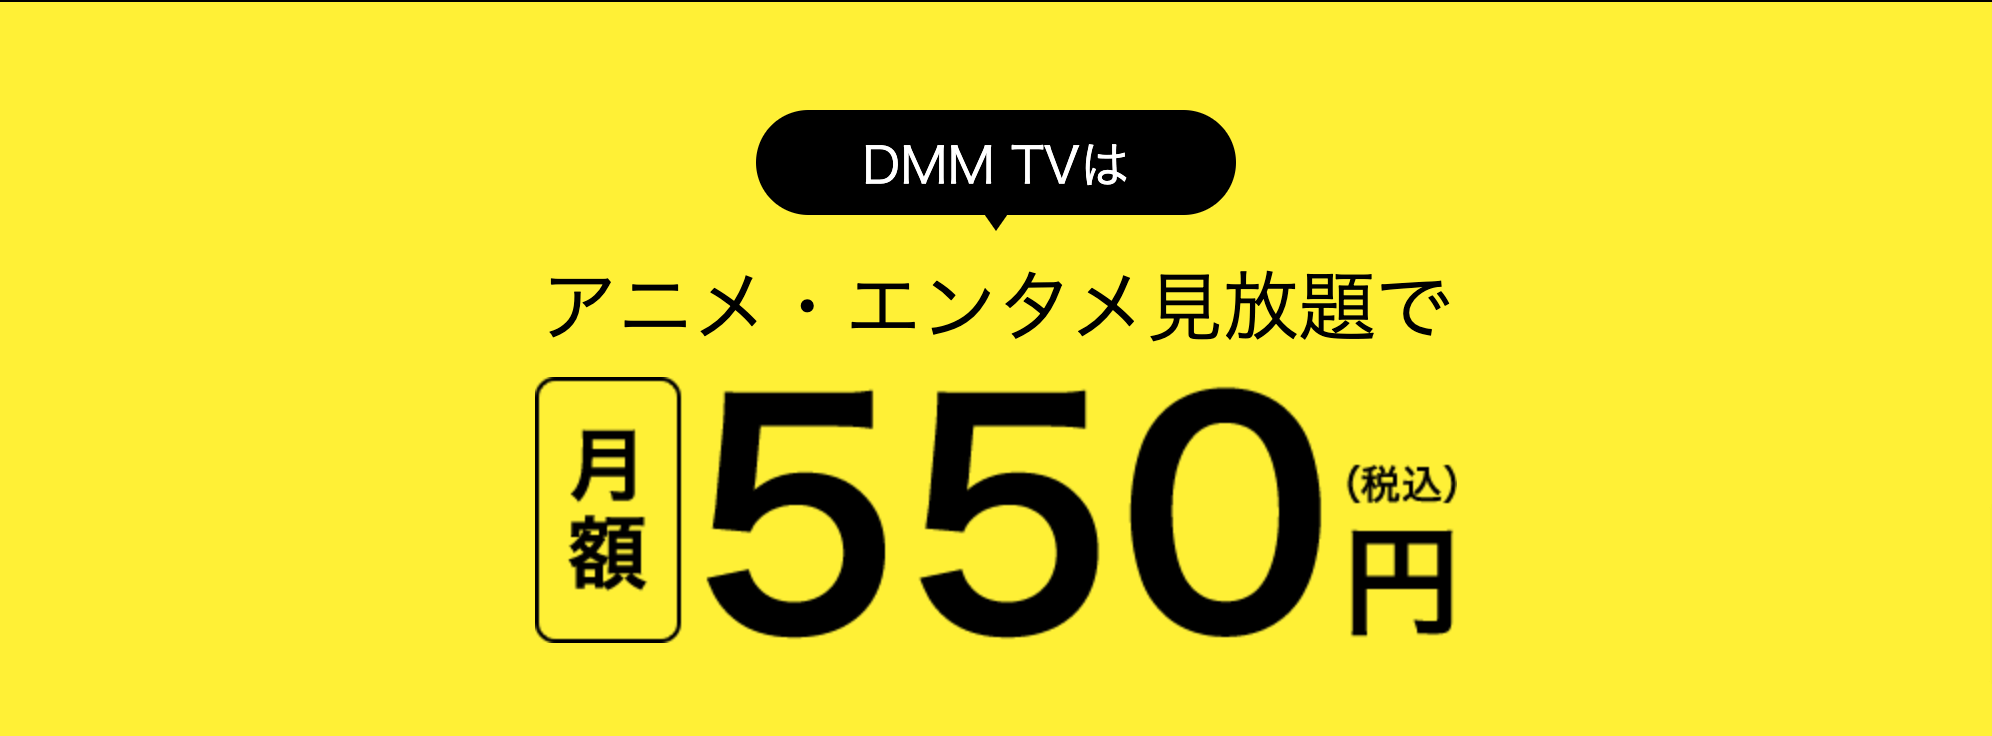 DMM TVの料金プラン